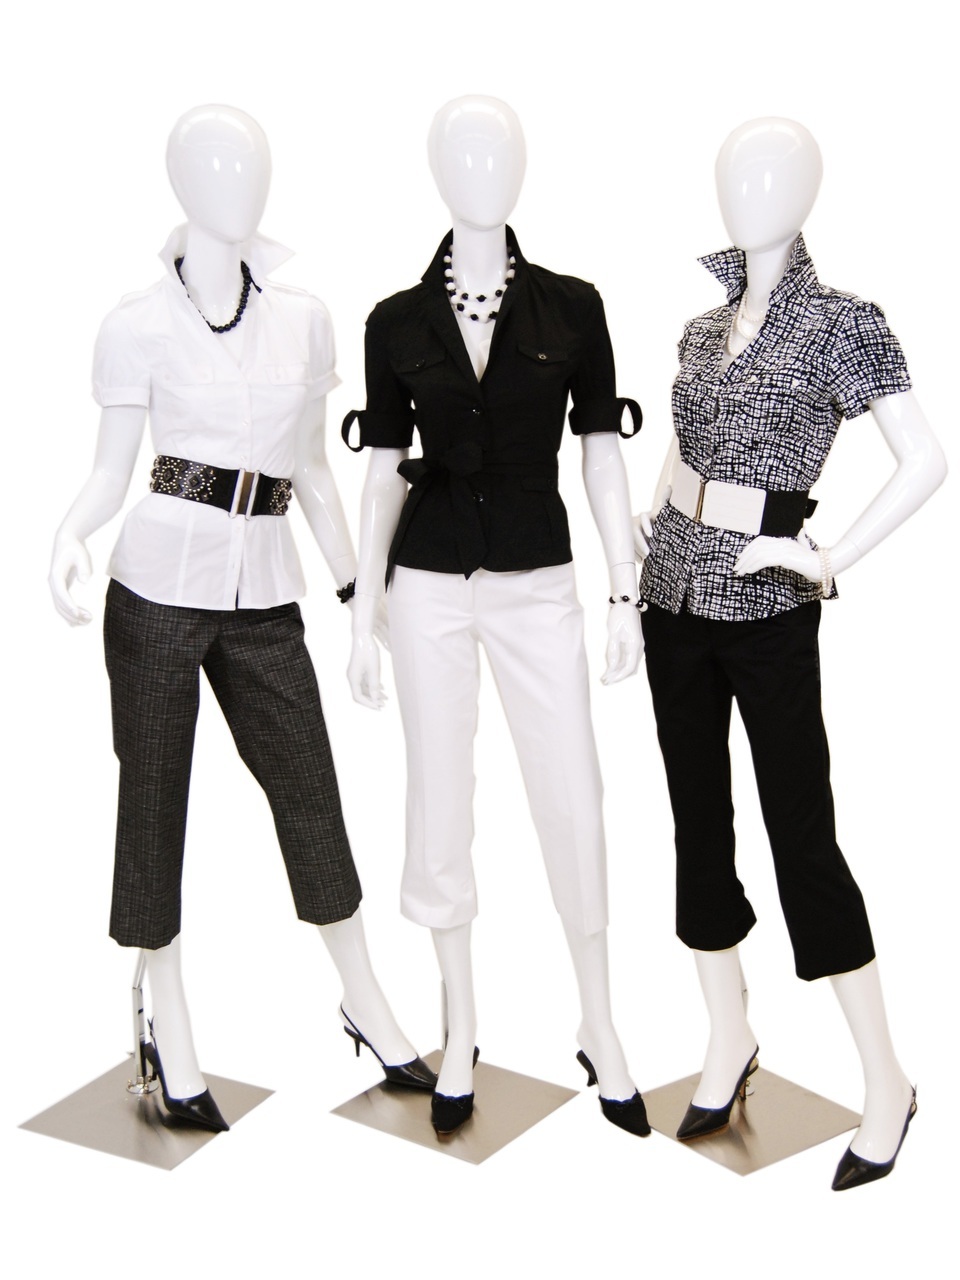 3 Gloss White Abstract Egg Head Mannequins